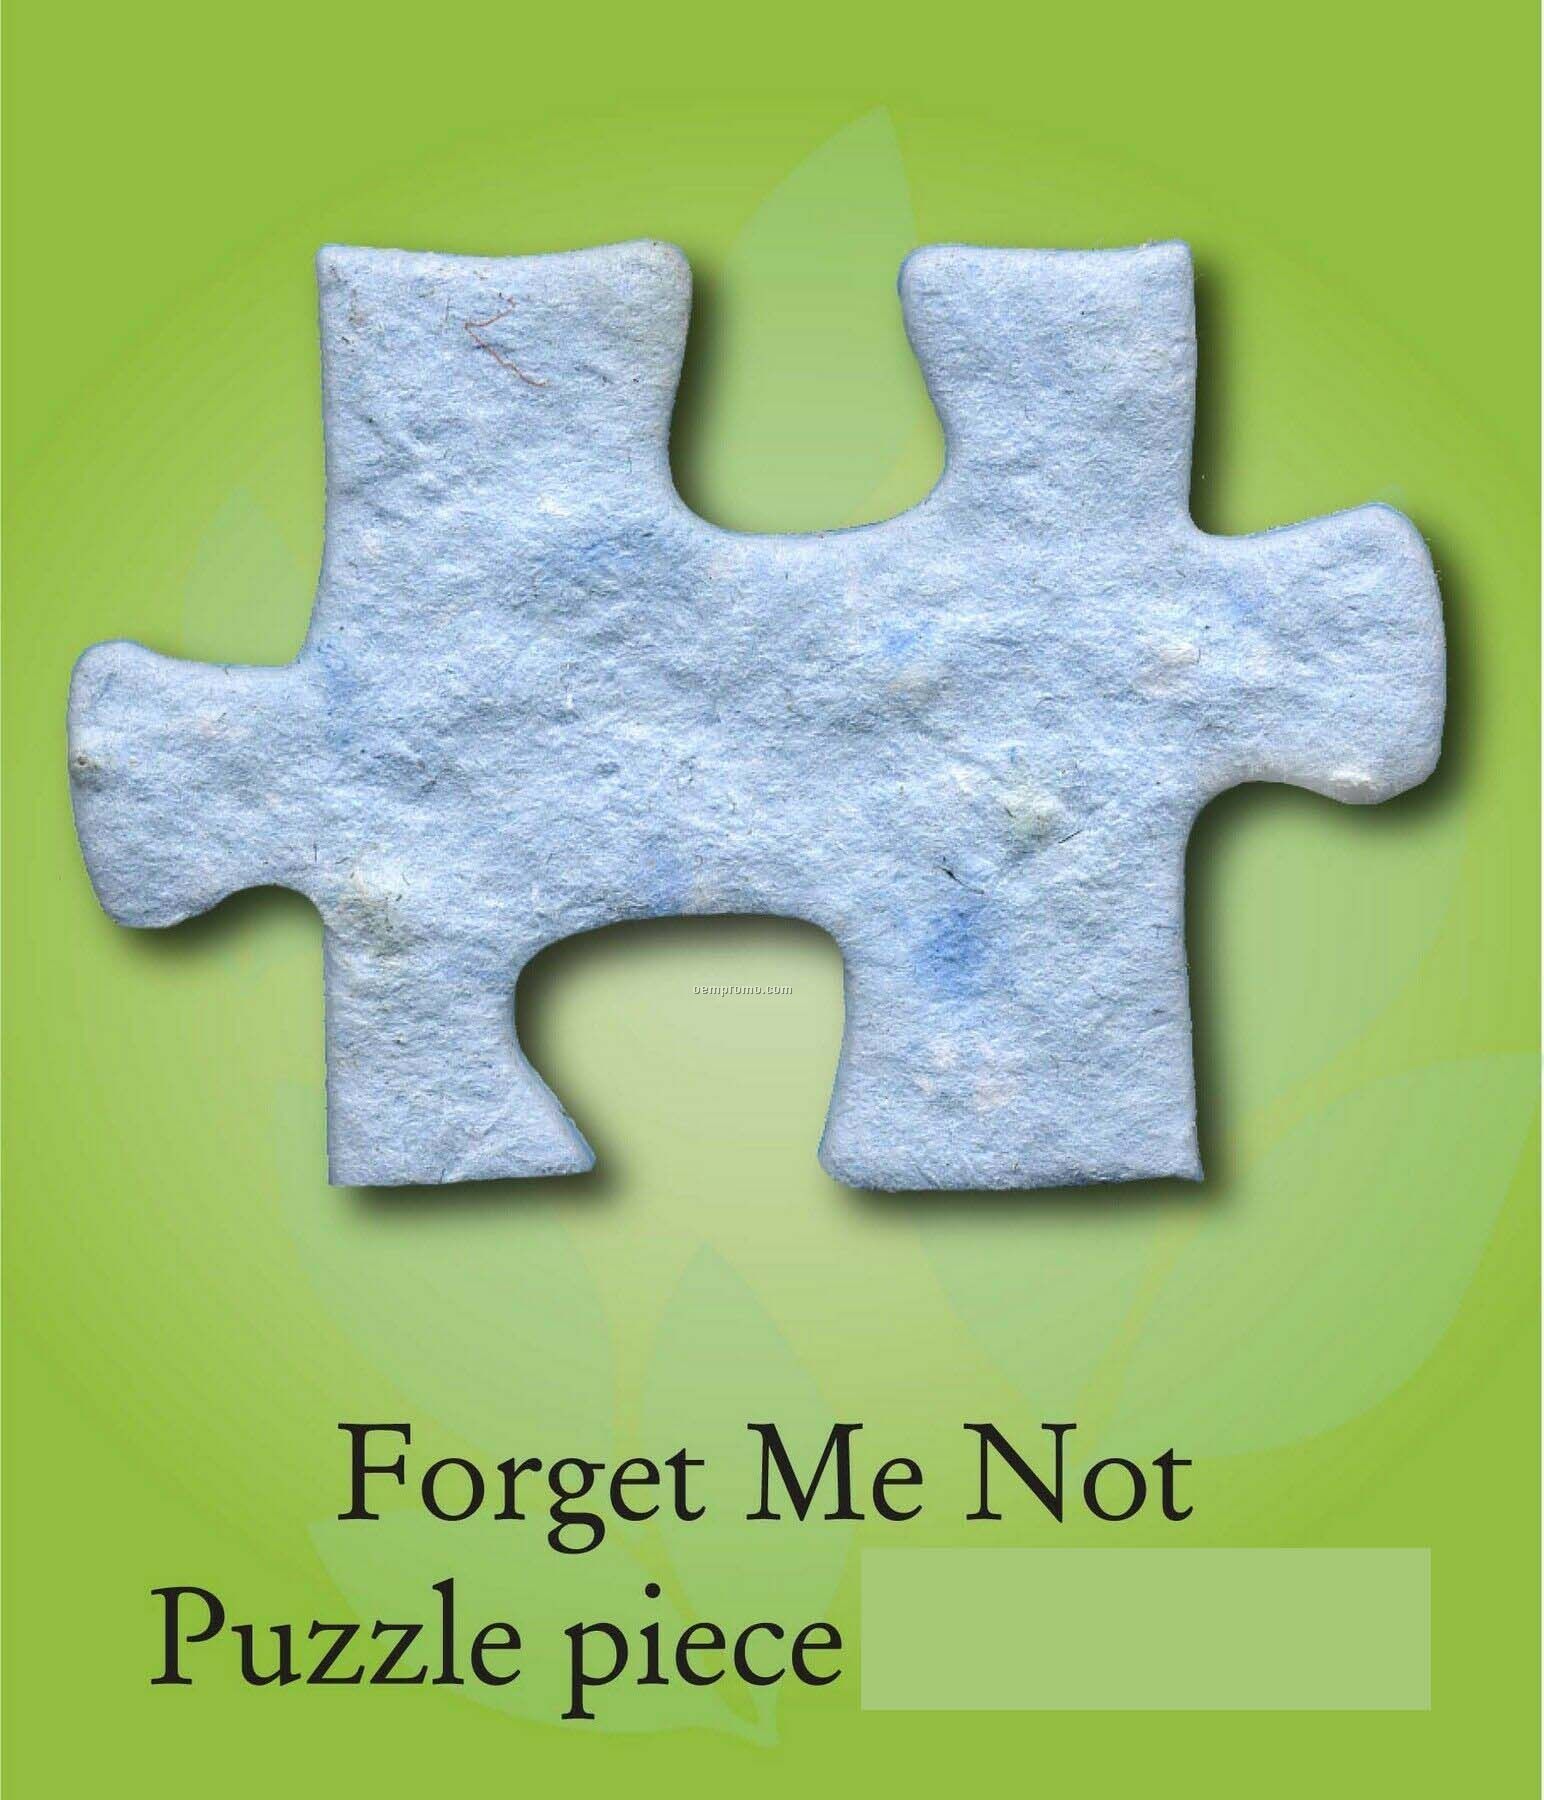 Puzzle Piece Ornament With Embedded Seed